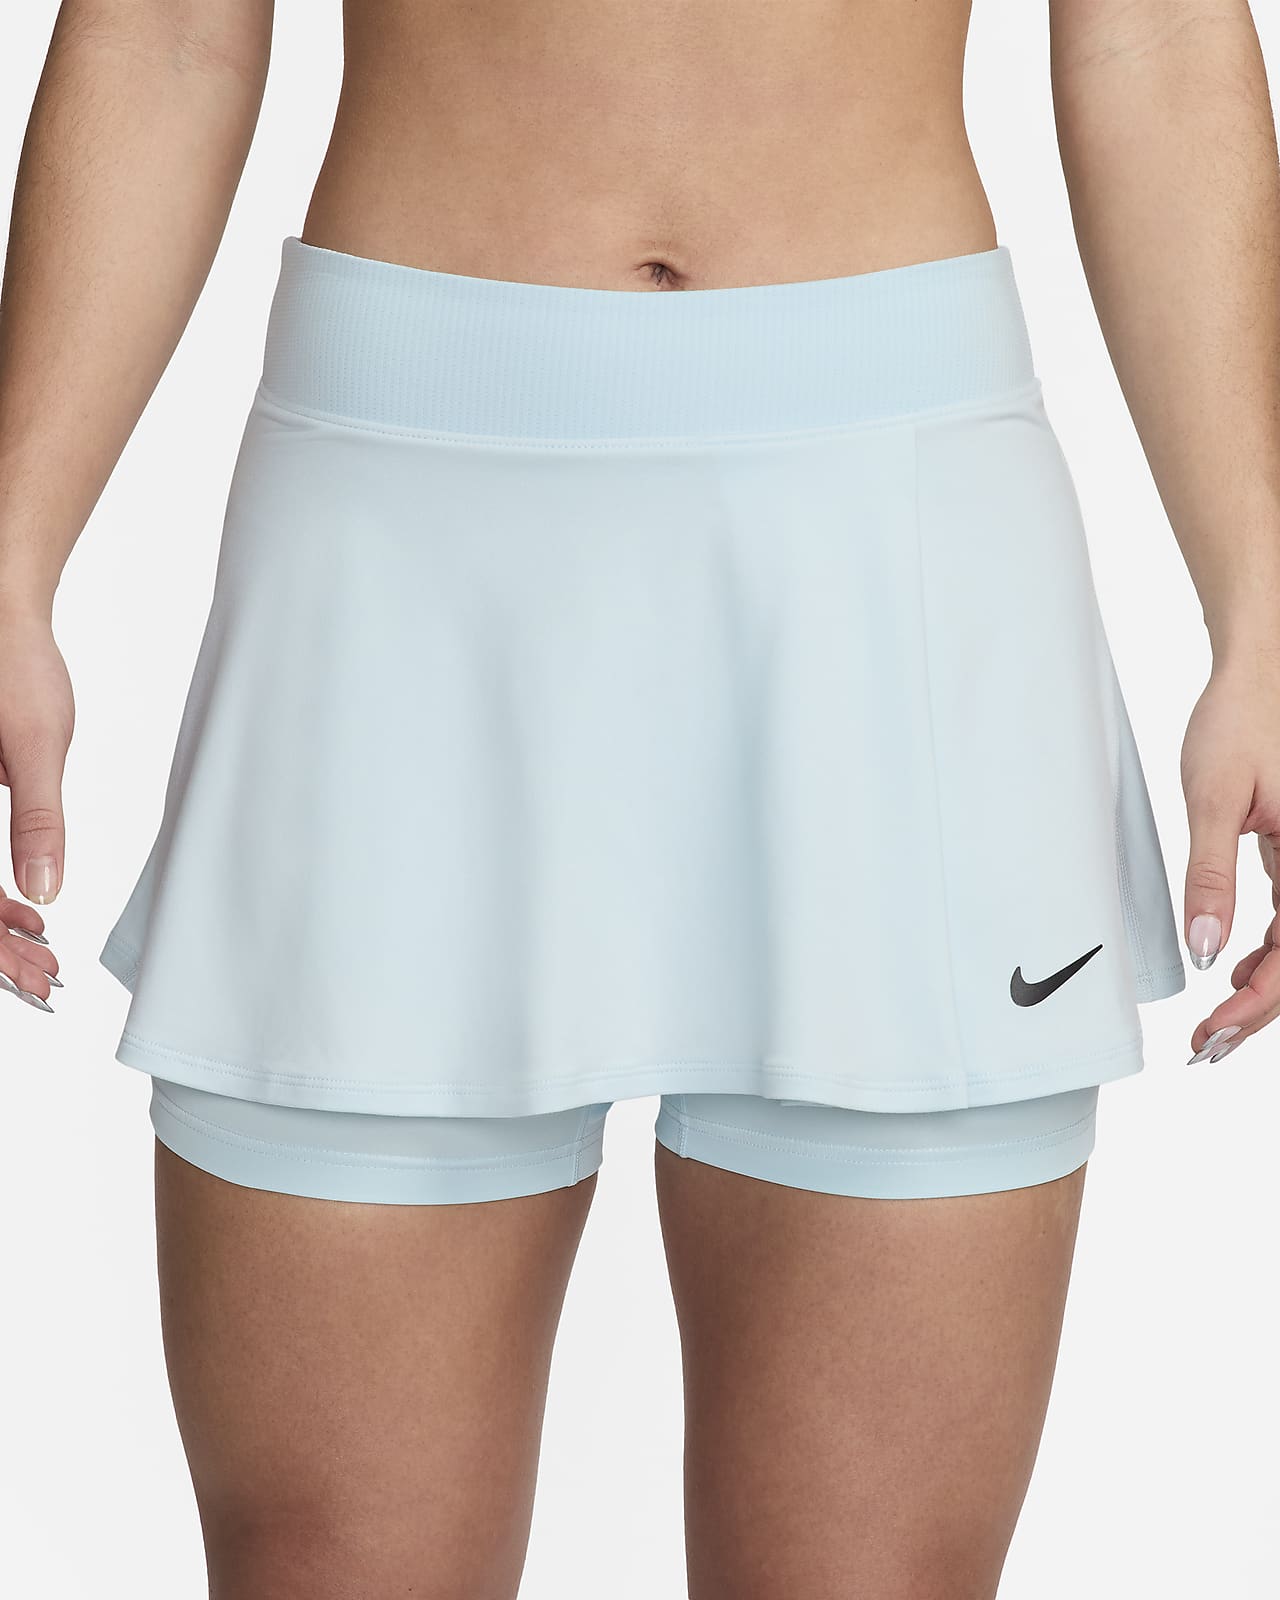  Women's Athletic Skirts - Beige / Women's Athletic Skirts /  Women's Activewear S: Clothing, Shoes & Jewelry